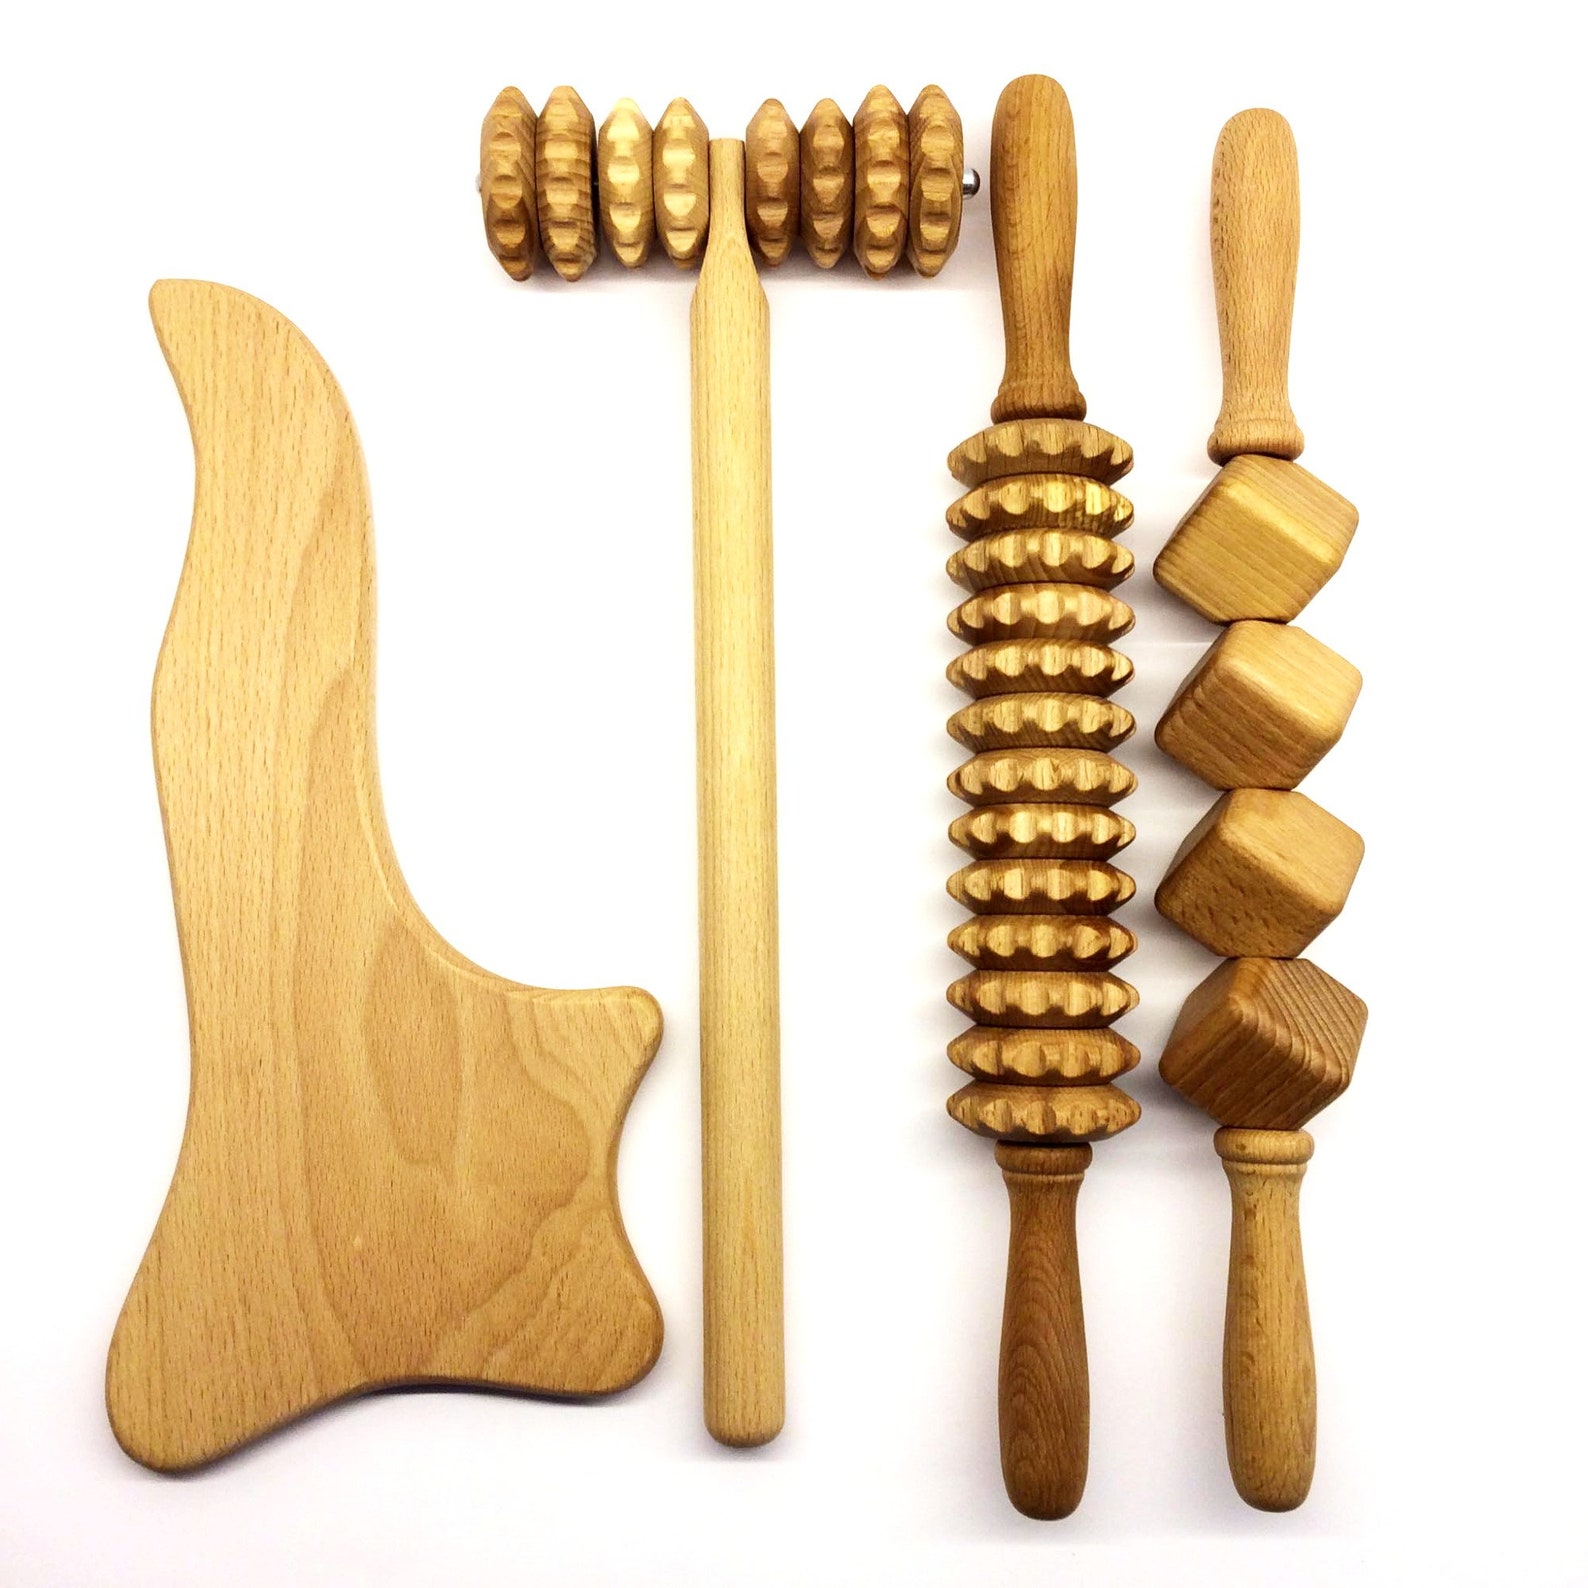 Wood Therapy Tools Wooden Massage Tools Set Body Shape Etsy